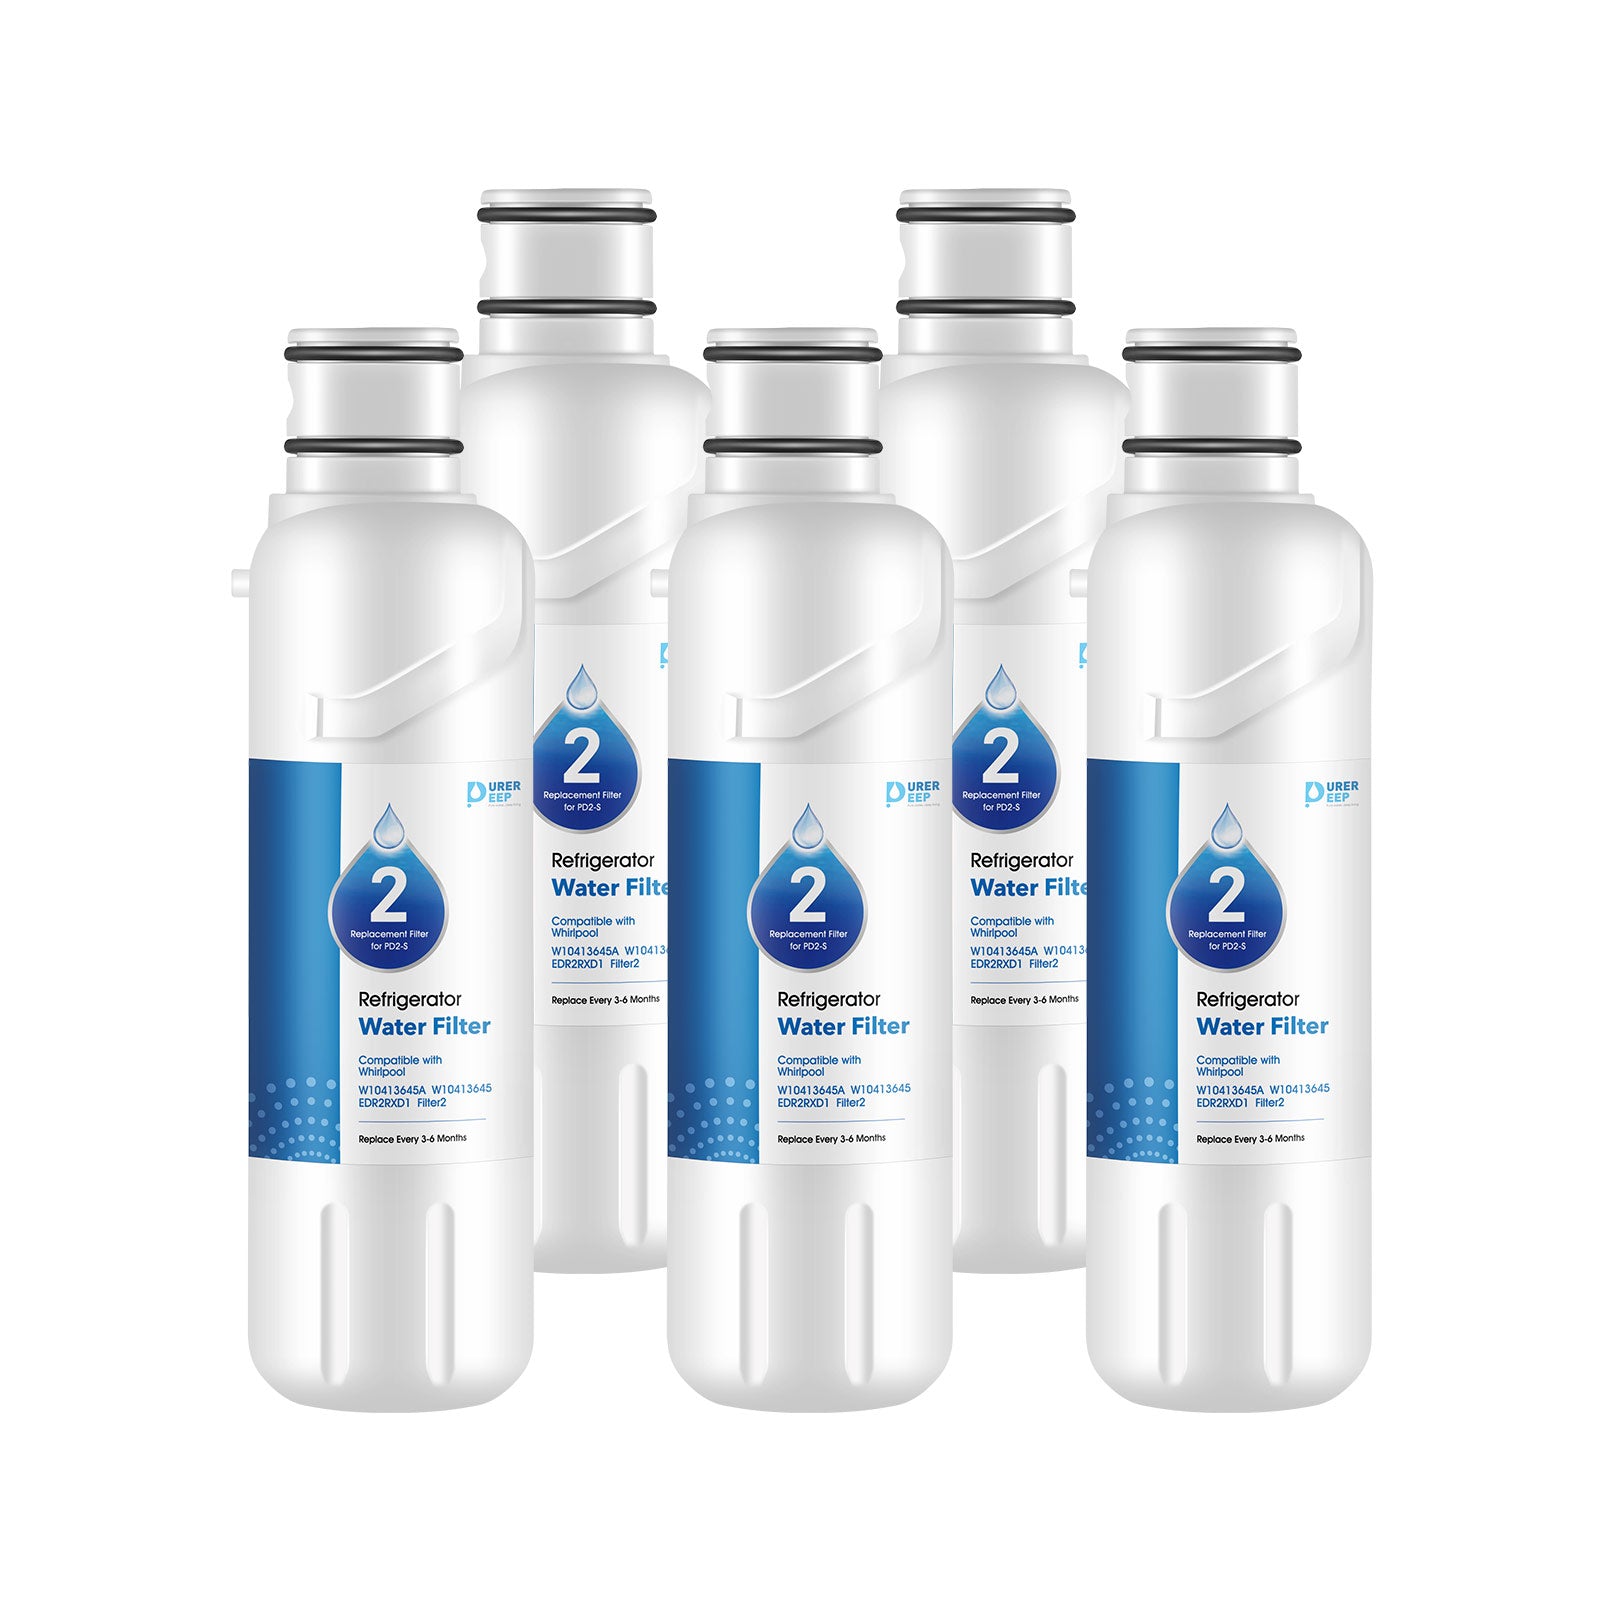 EDR2RXD1 Replacement Water Filter 2 for Whirlpool Refrigerator Water Filter  2 EDR2RXD1 and EveryDrop Filter 2 EDR2RXD1 W10413645A W10413645(Pack of 4)  